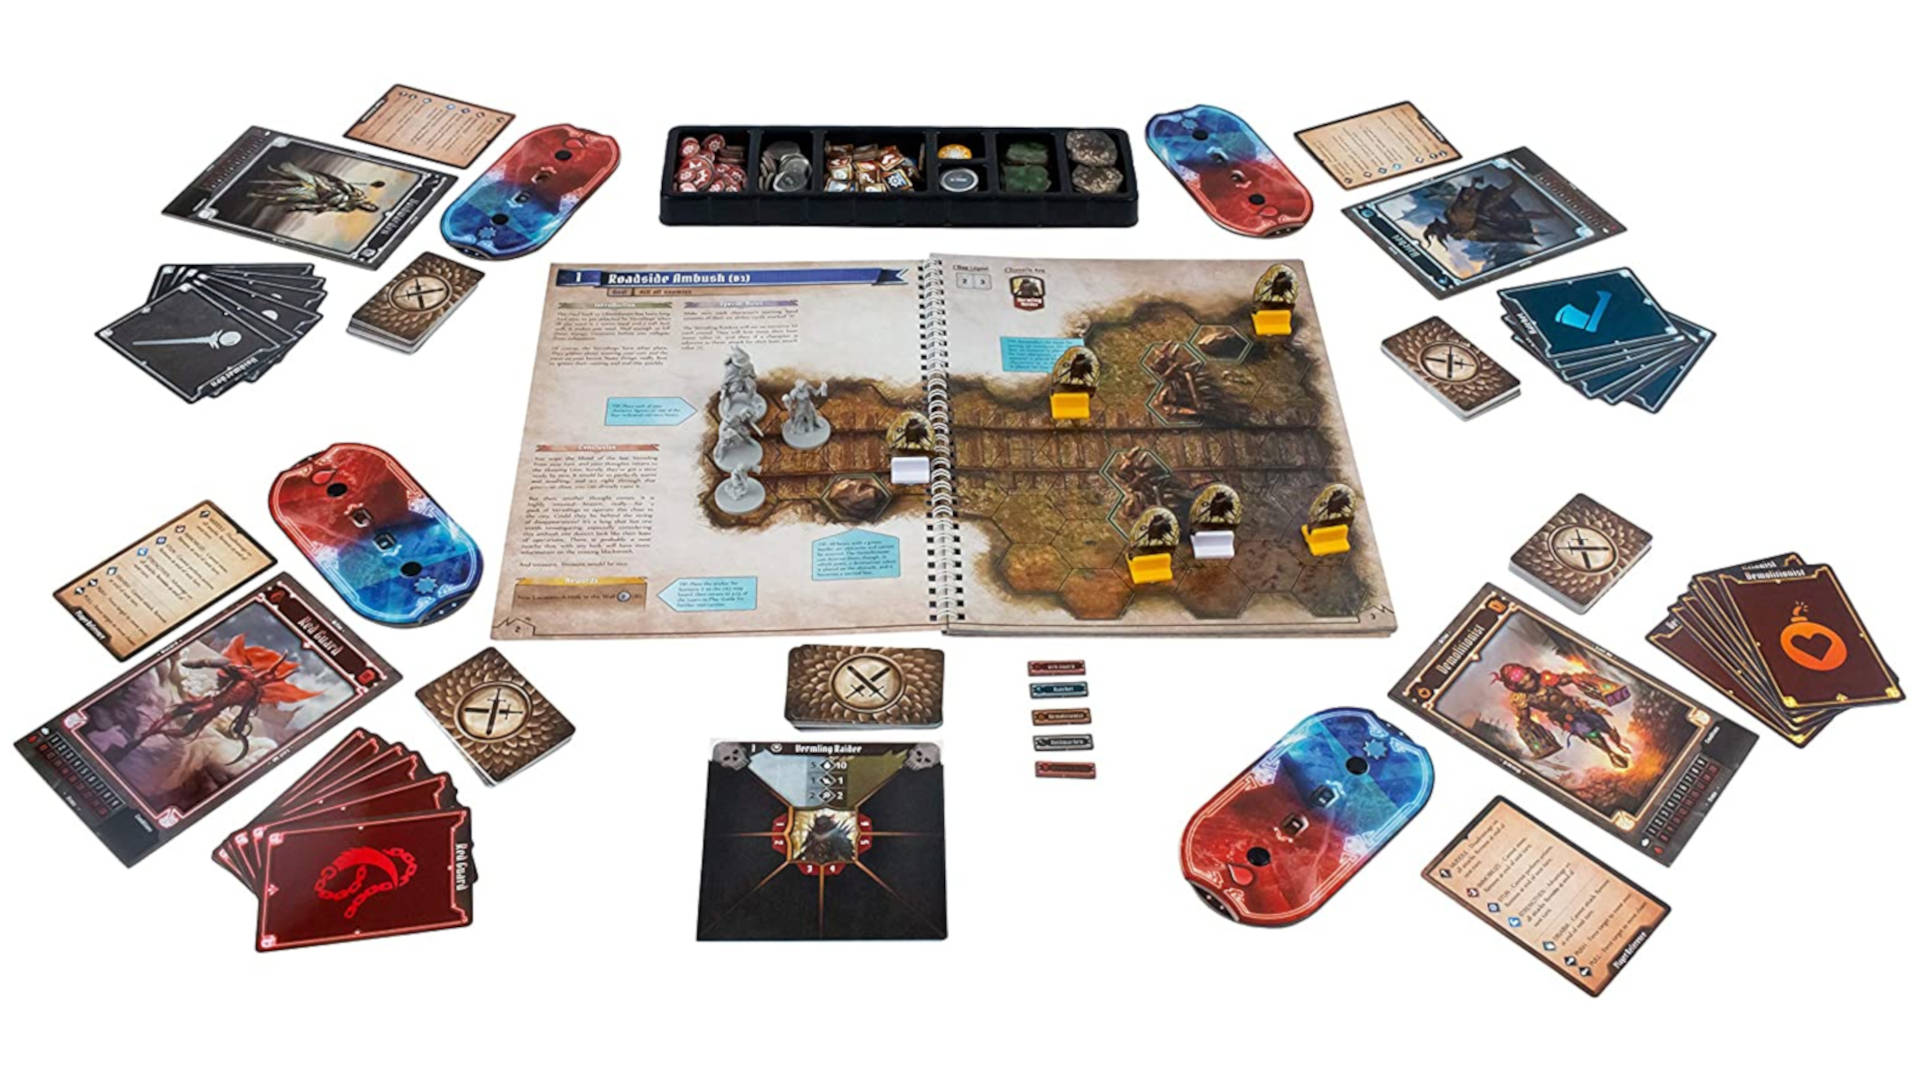 25 Best Solo Board Games To Play Alone But Still Have Fun